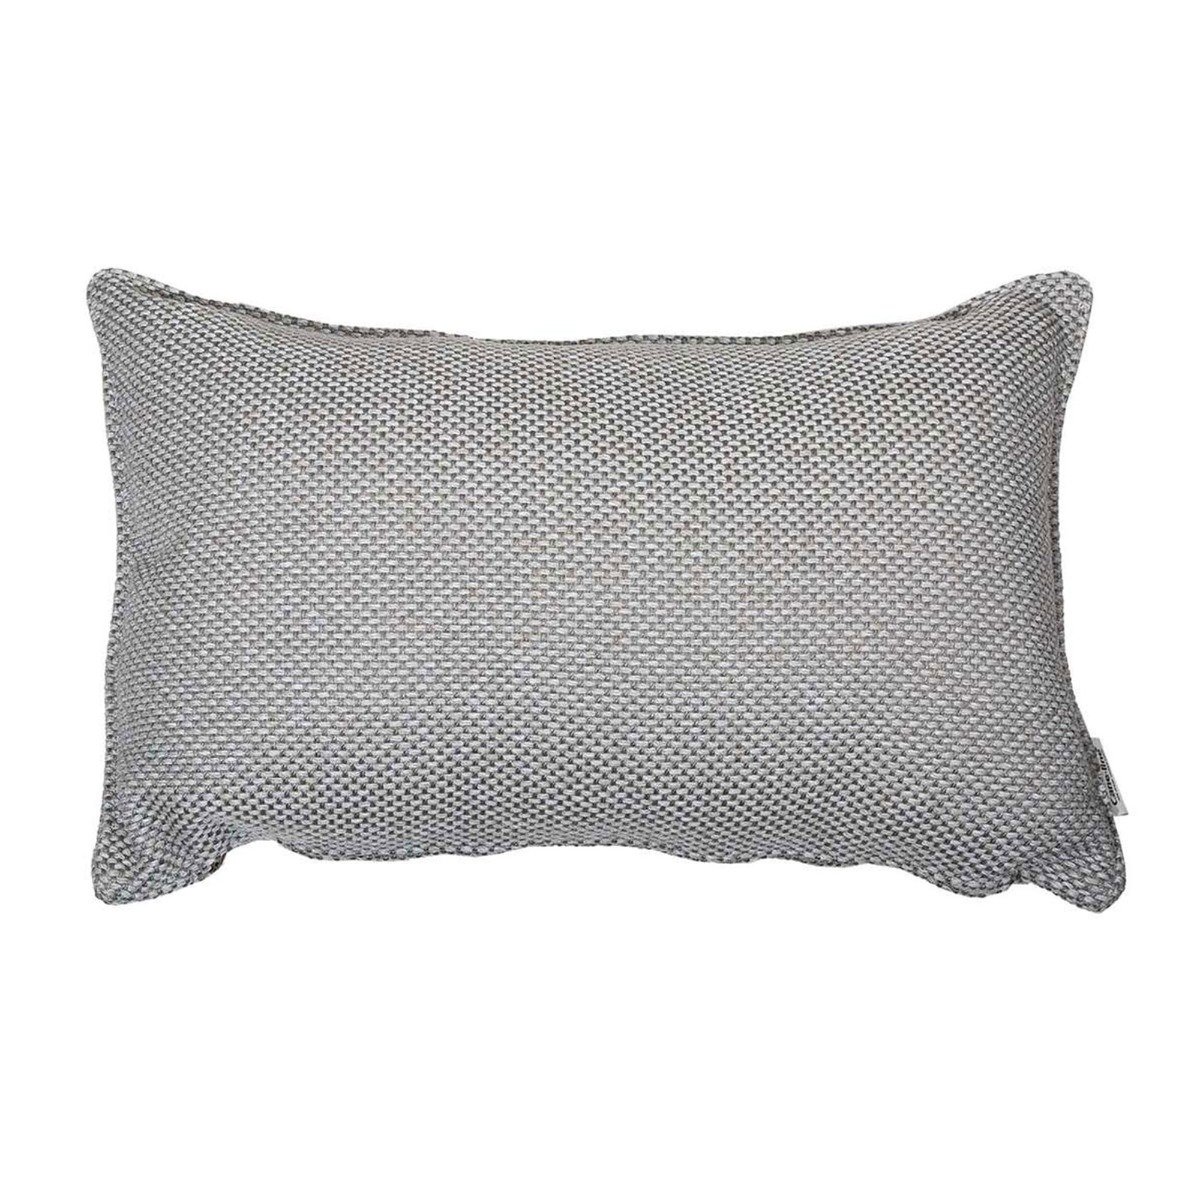 Cane Line Focus Scatter Cushion 52x32x12cm, Square, Grey | Barker & Stonehouse